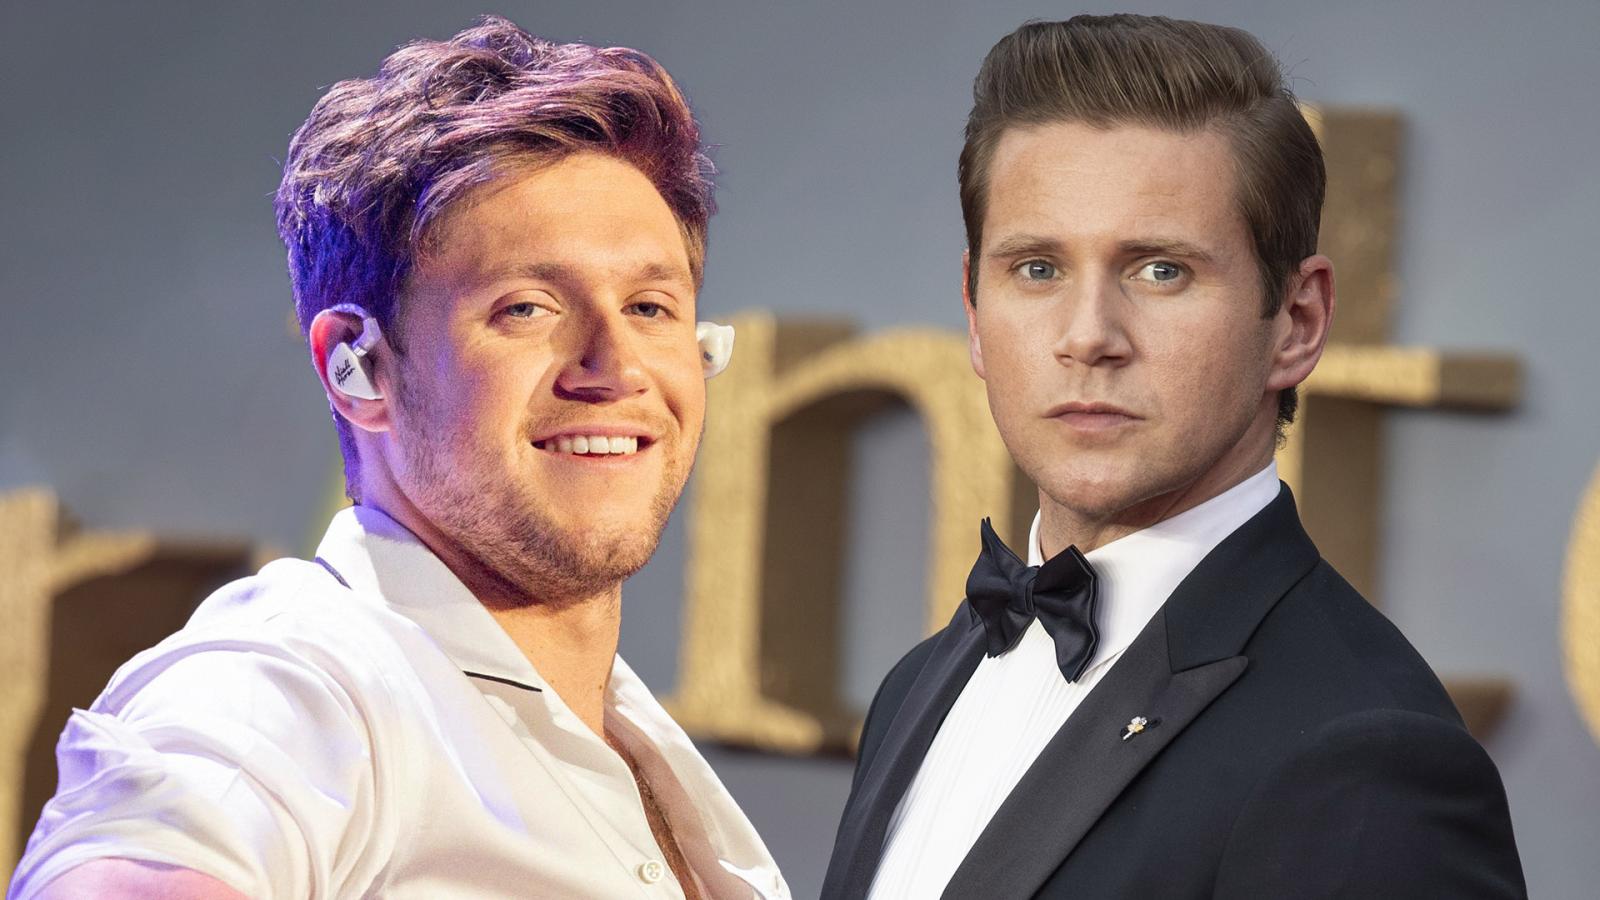 A One Direction Biopic? You Won't Guess Who Niall Horan Would Want to Star in It - image 1